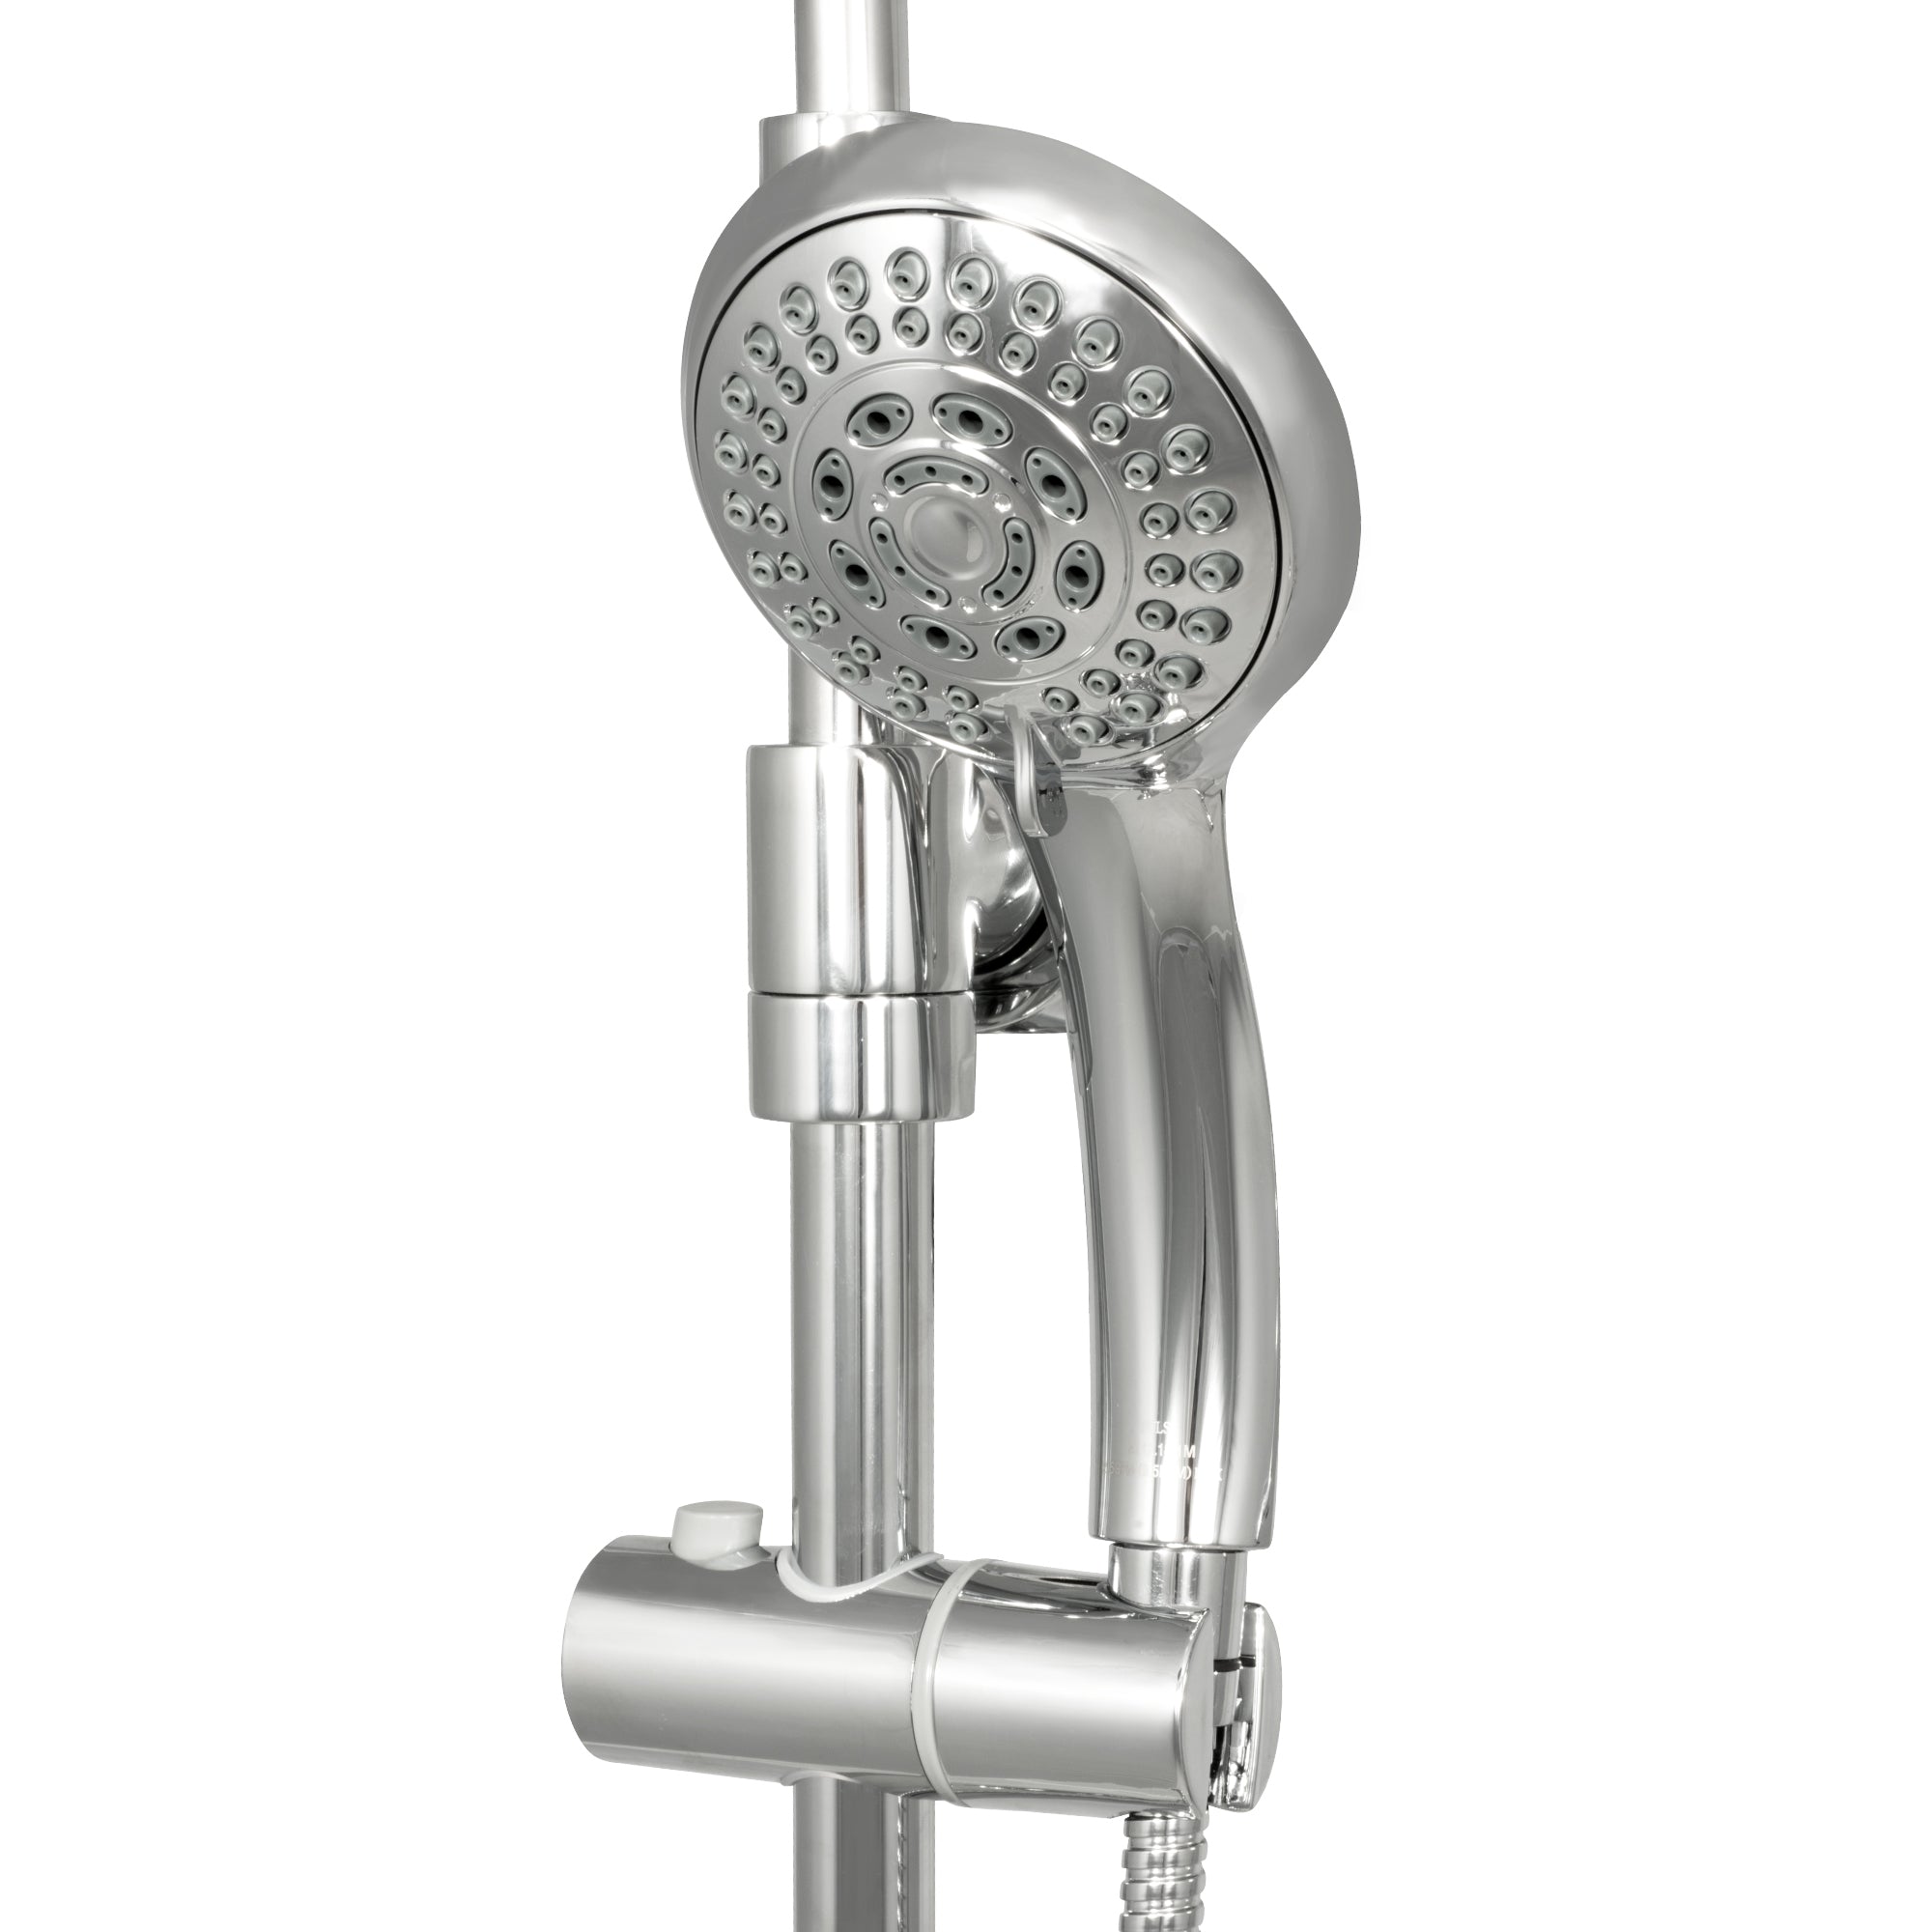 PULSE ShowerSpas Shower System - Lanikai ShowerSpa - with 8" Rain showerhead with soft tips, Five-function hand shower with 59" double-interlocking stainless steel hose, 3 dual-function body jets and diverter - Polished Chrome - 1028 - Vital Hydrotherapy